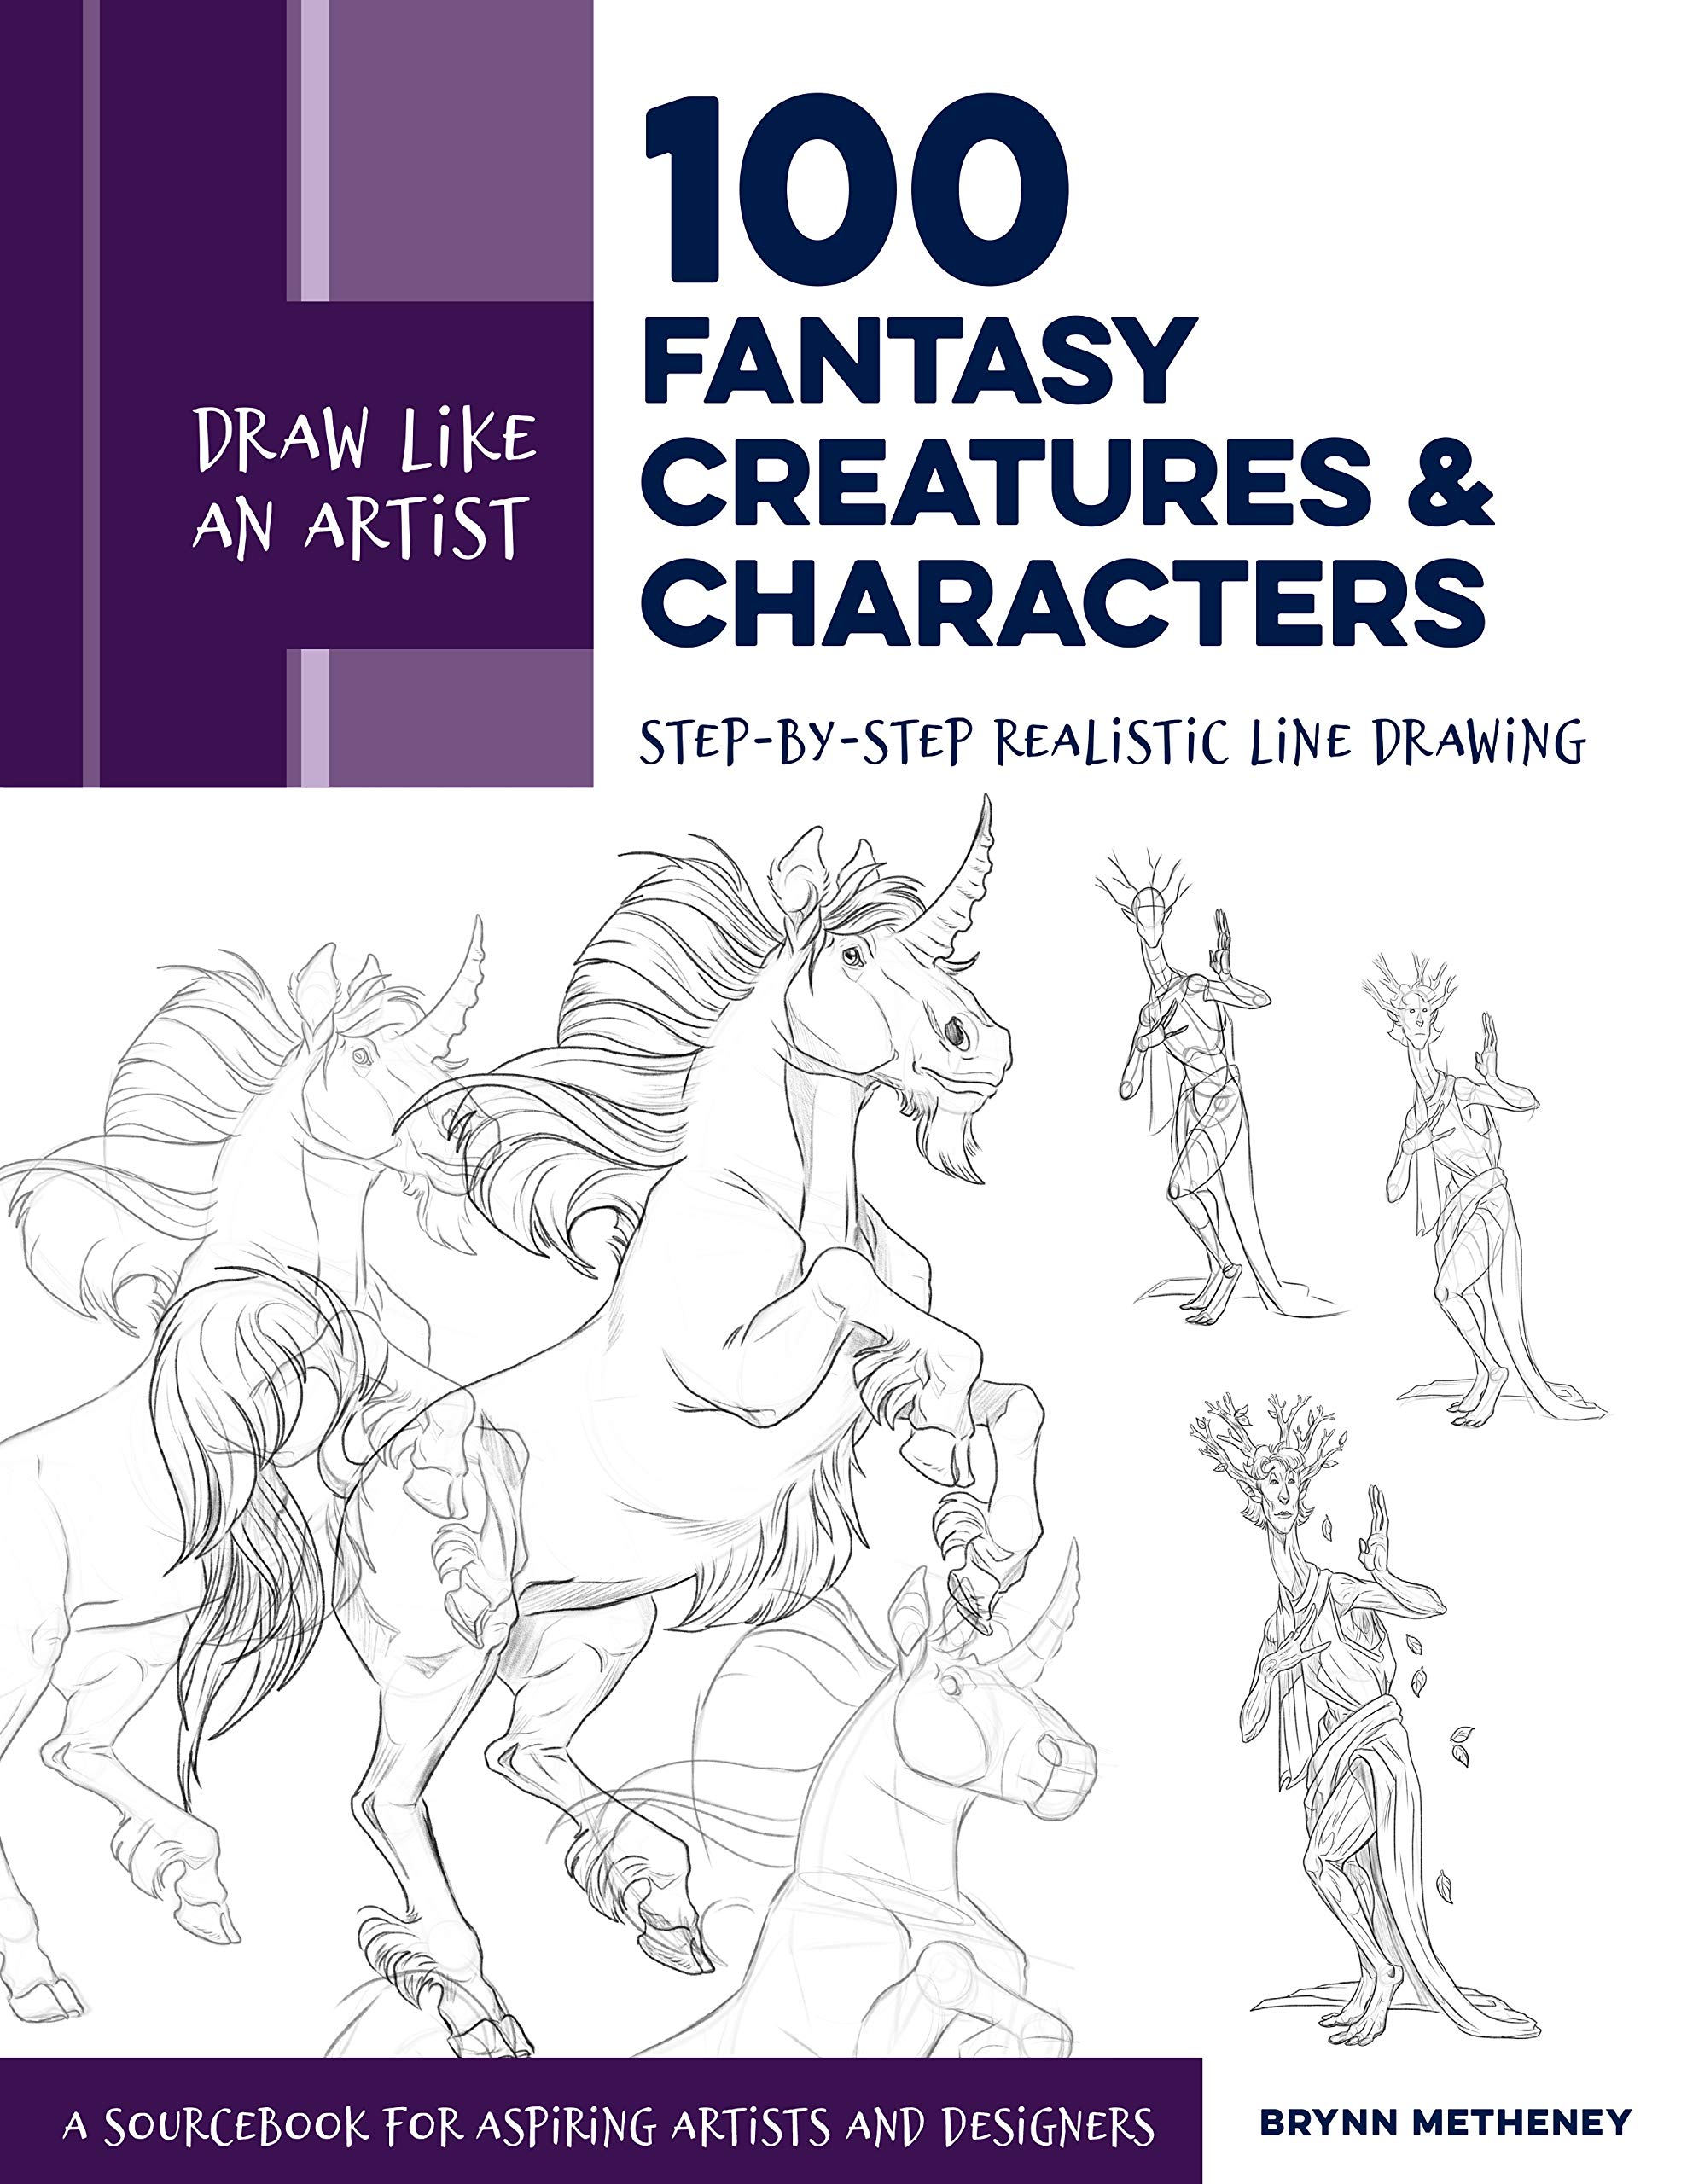 Draw Like an Artist: 100 Fantasy Creatures and Characters | Brynn Metheney